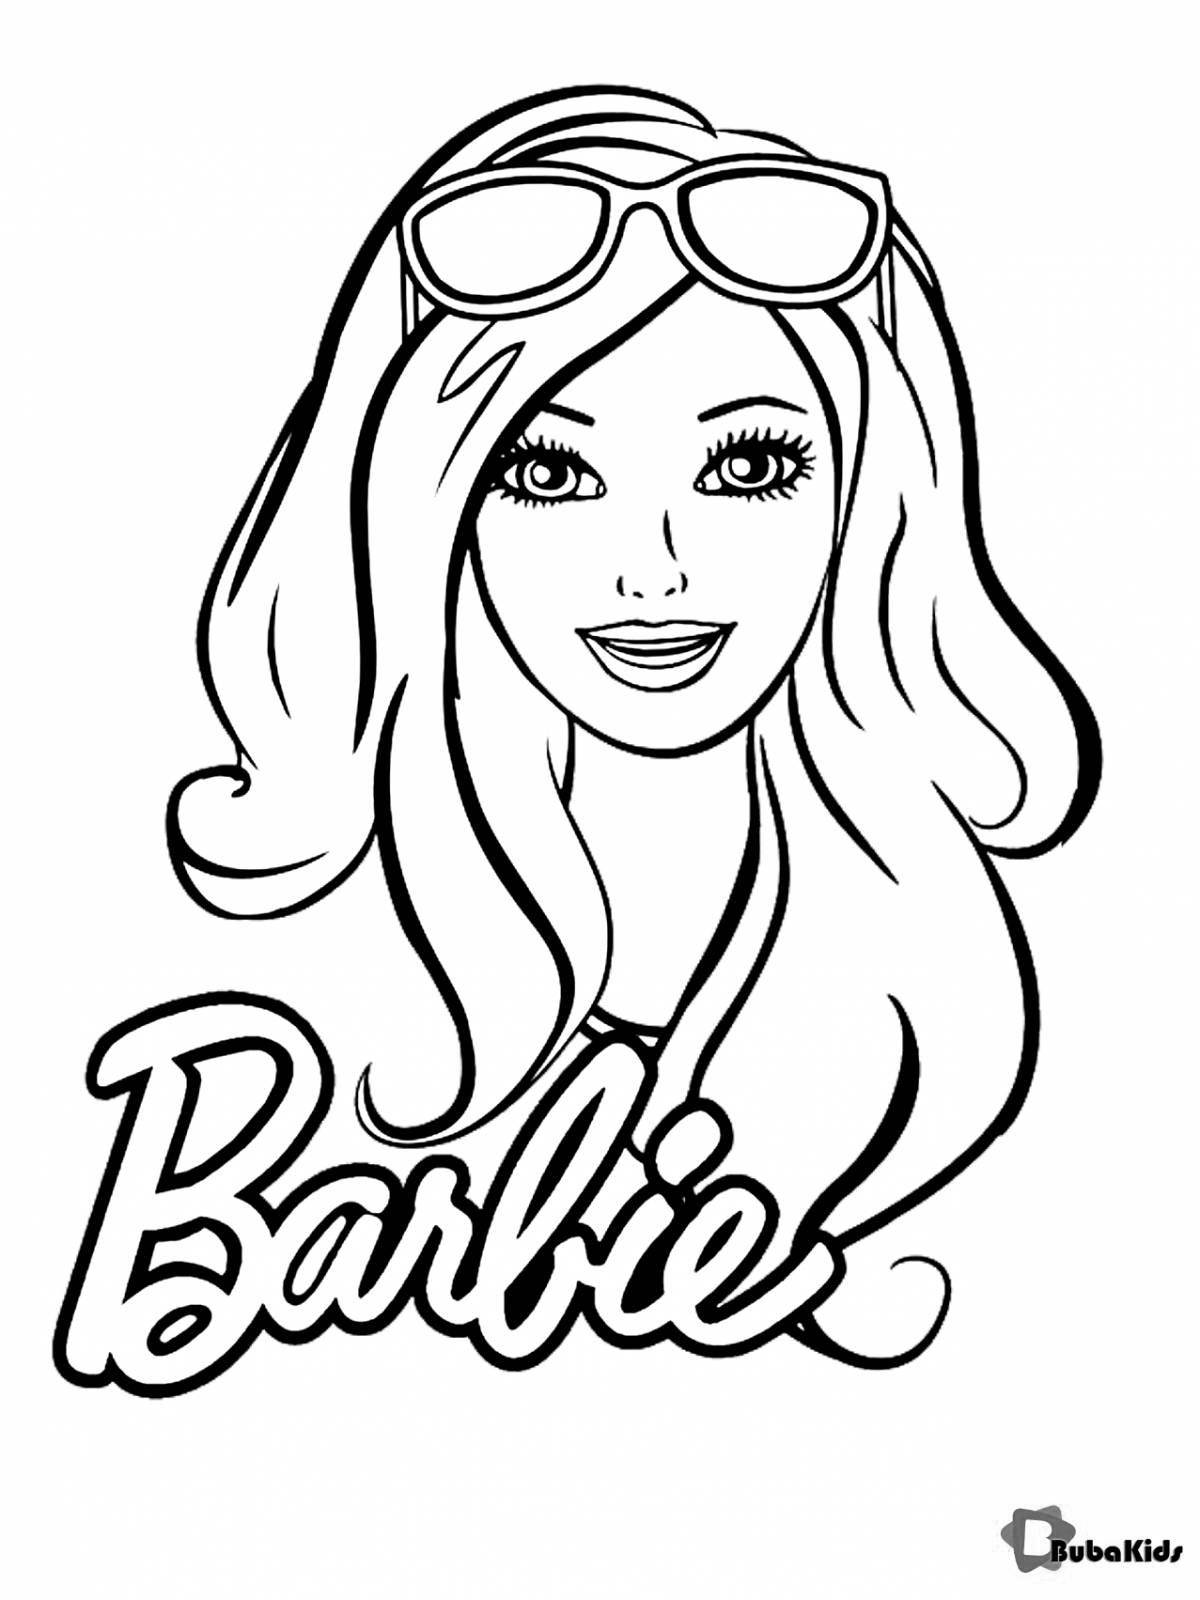 Coloring page cheerful beauty salon